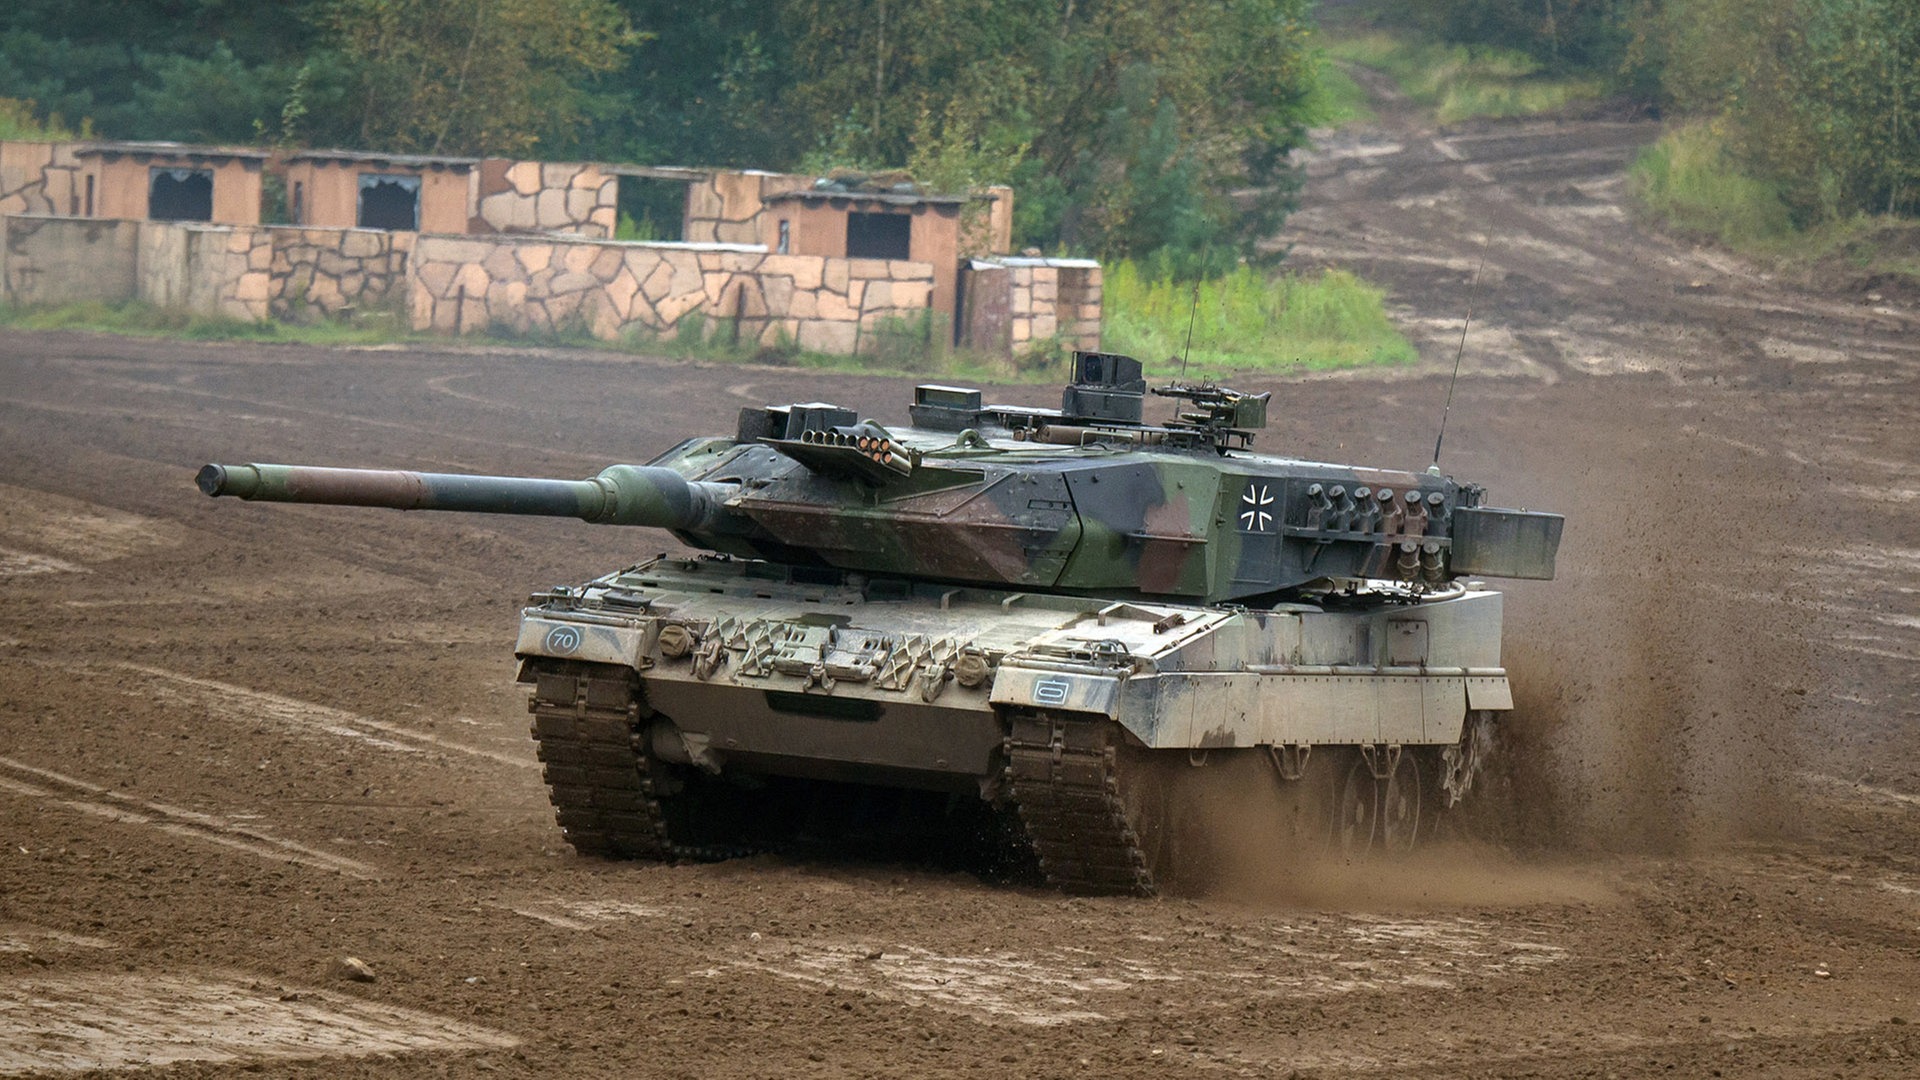 Deliveries not far off: Ukrainian military completes Leopard 2 tank training programme in Germany